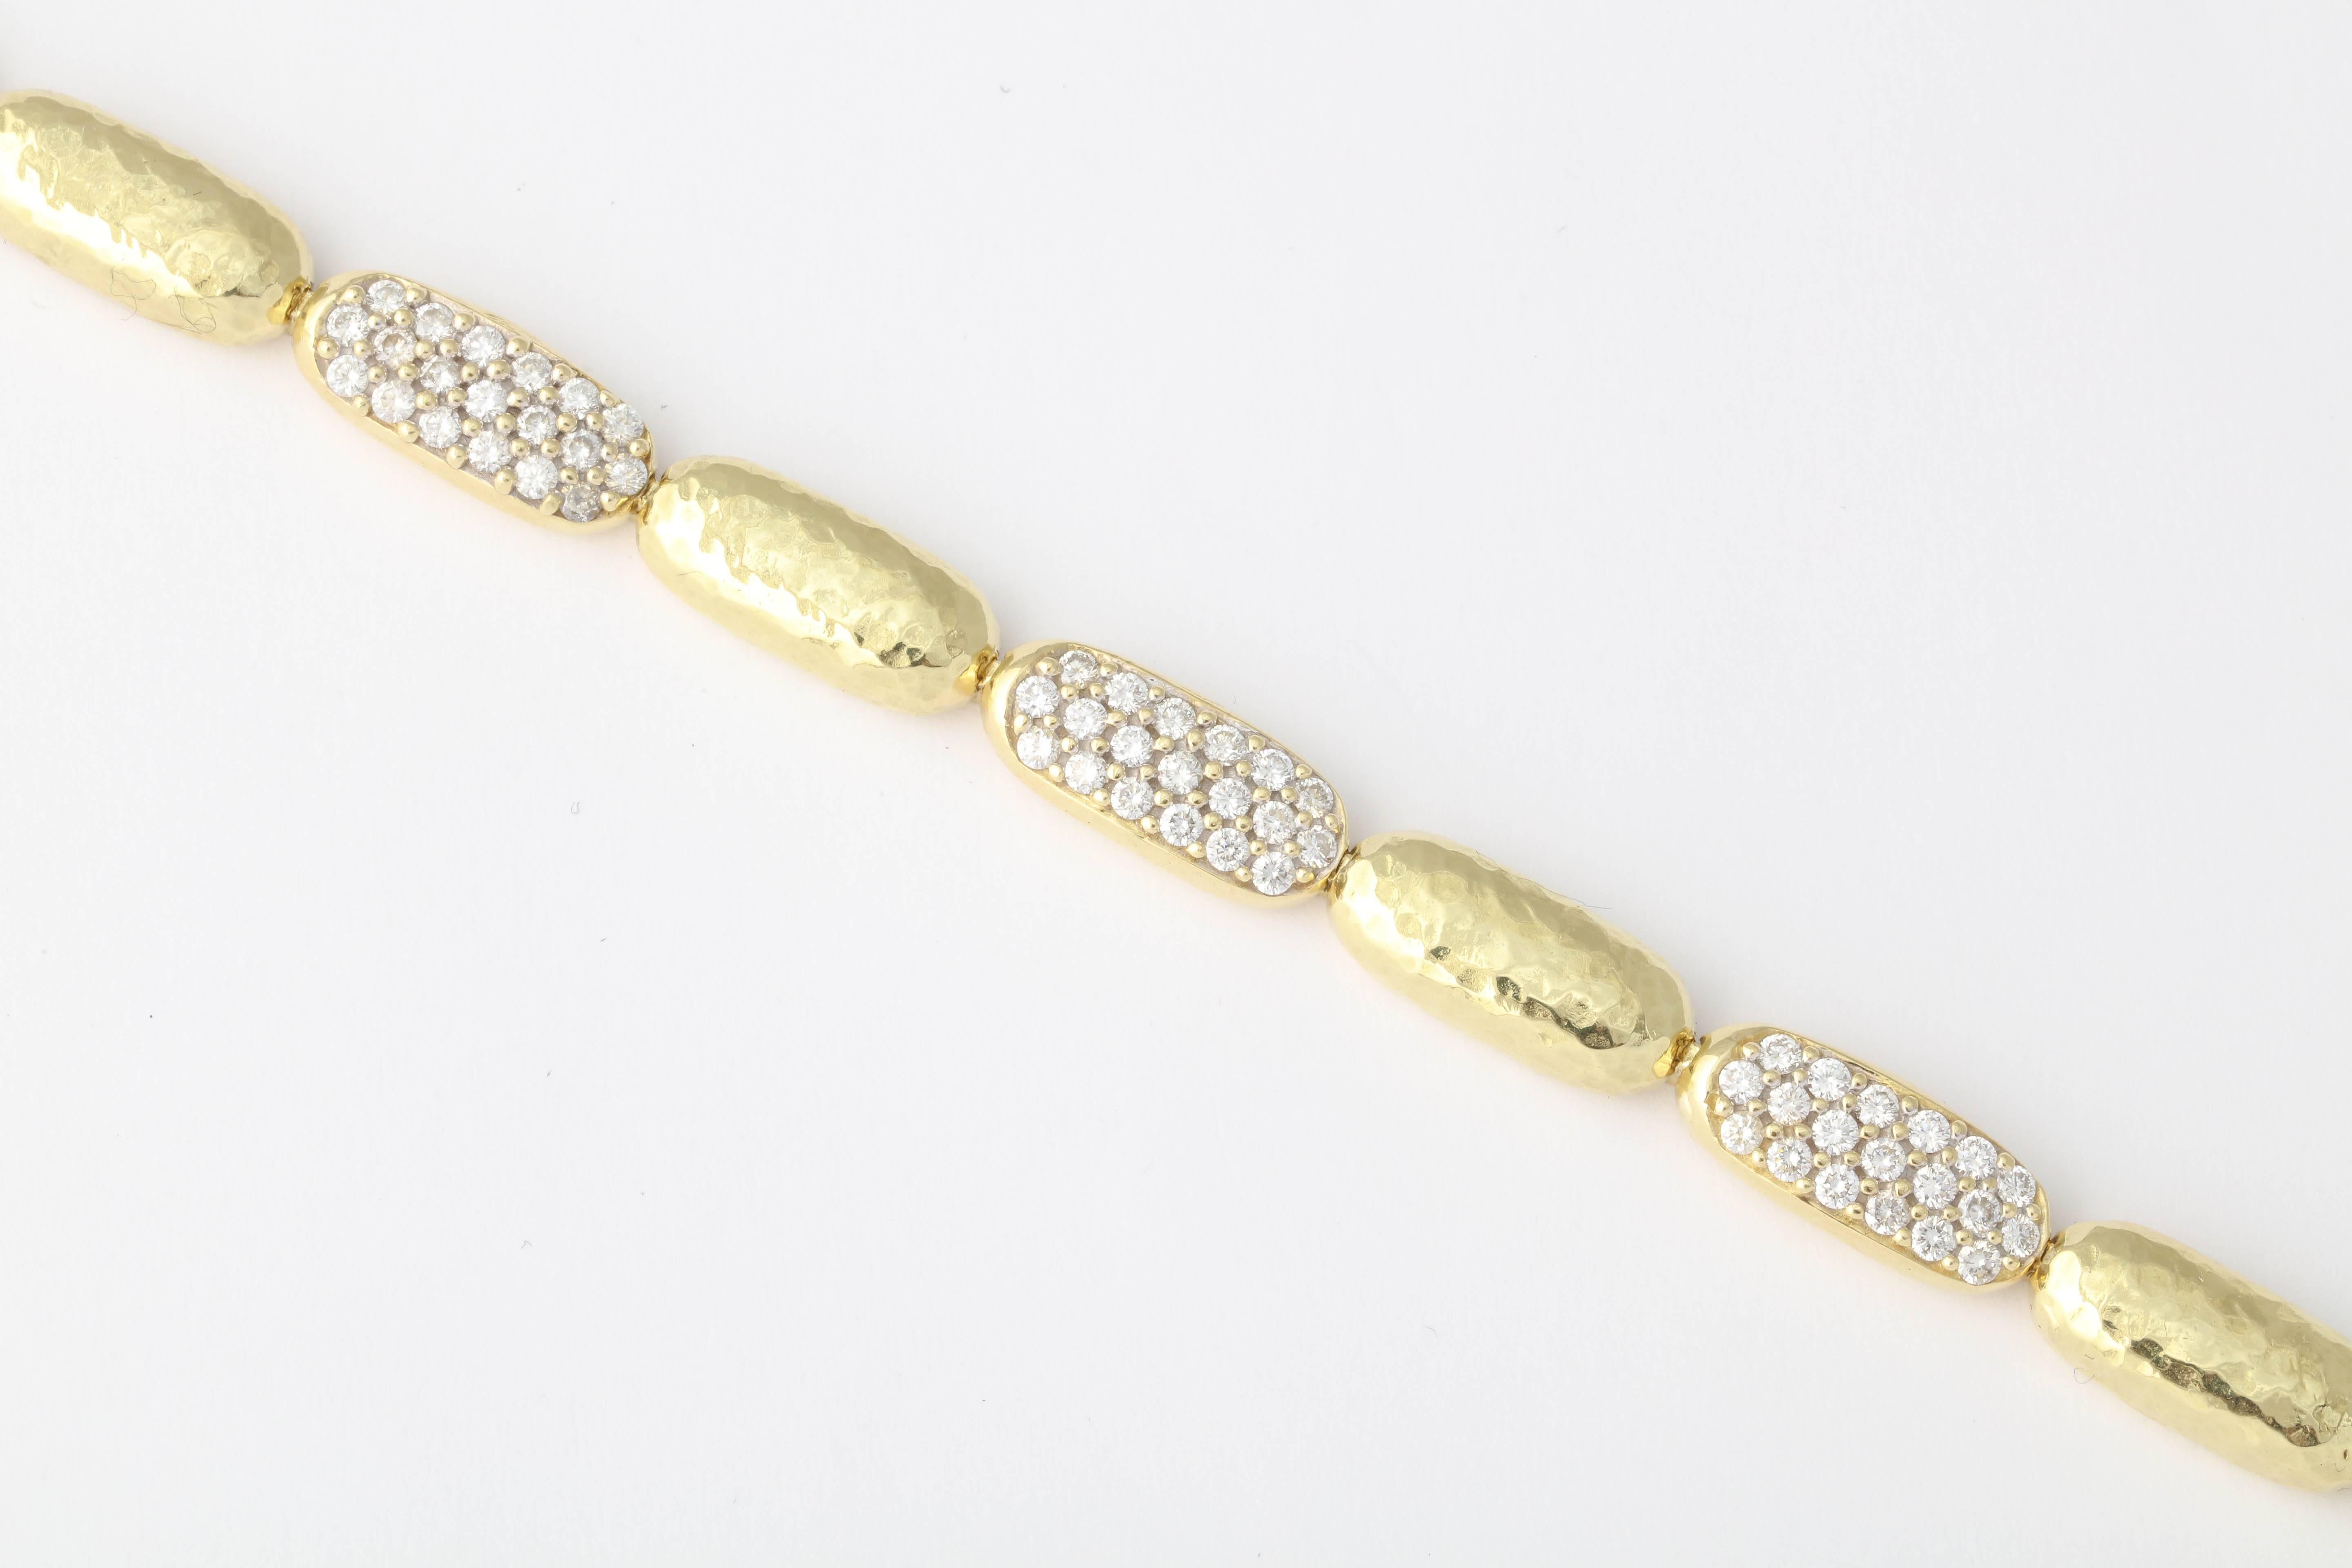 Alternating 18kt Yellow Gold Hammered Oval links with Pave Diamond links. Over 3.5 carats of full cut clean & white Diamonds.
  Just that little extra bit of bling to play off your Cartier watch or Hermes gold Bracelet. So chic &  oh so cool!